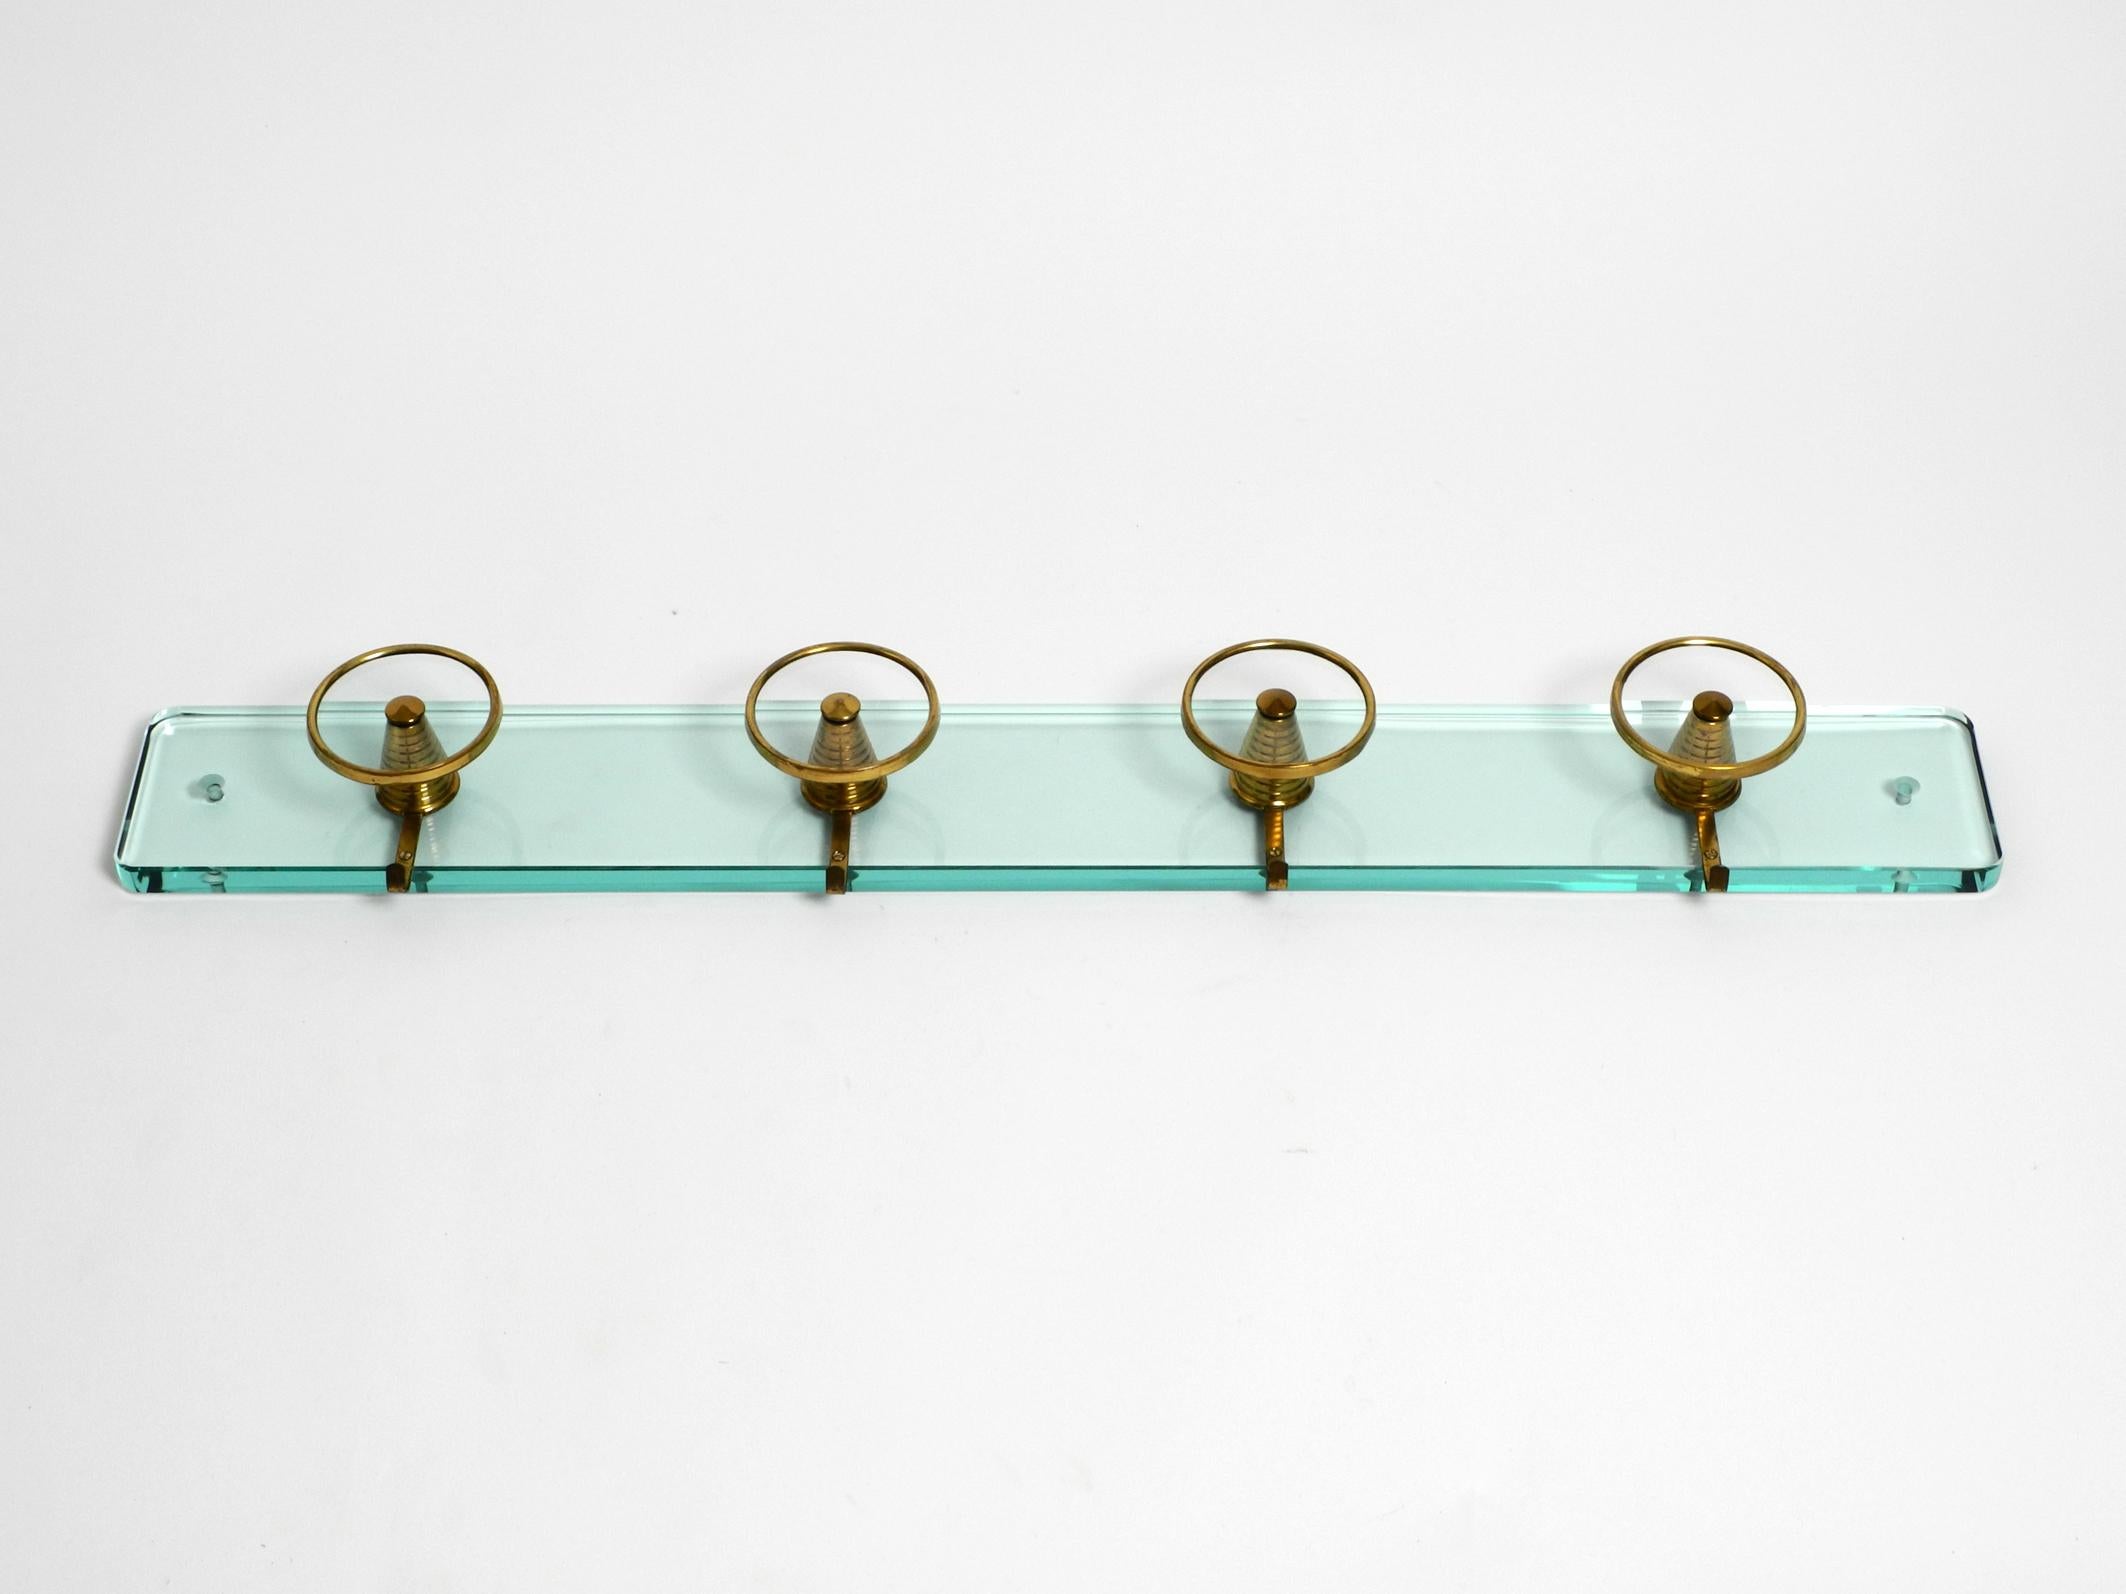 Rare beautiful mid century glass wall coat rack with large glass and brass hanging hooks.
Manufacturer is Fontana Arte. Made in Italy. Great Italian 1950s design.
Very high quality cut glass 2 cm thick.
In the middle, 4 large round glass hooks